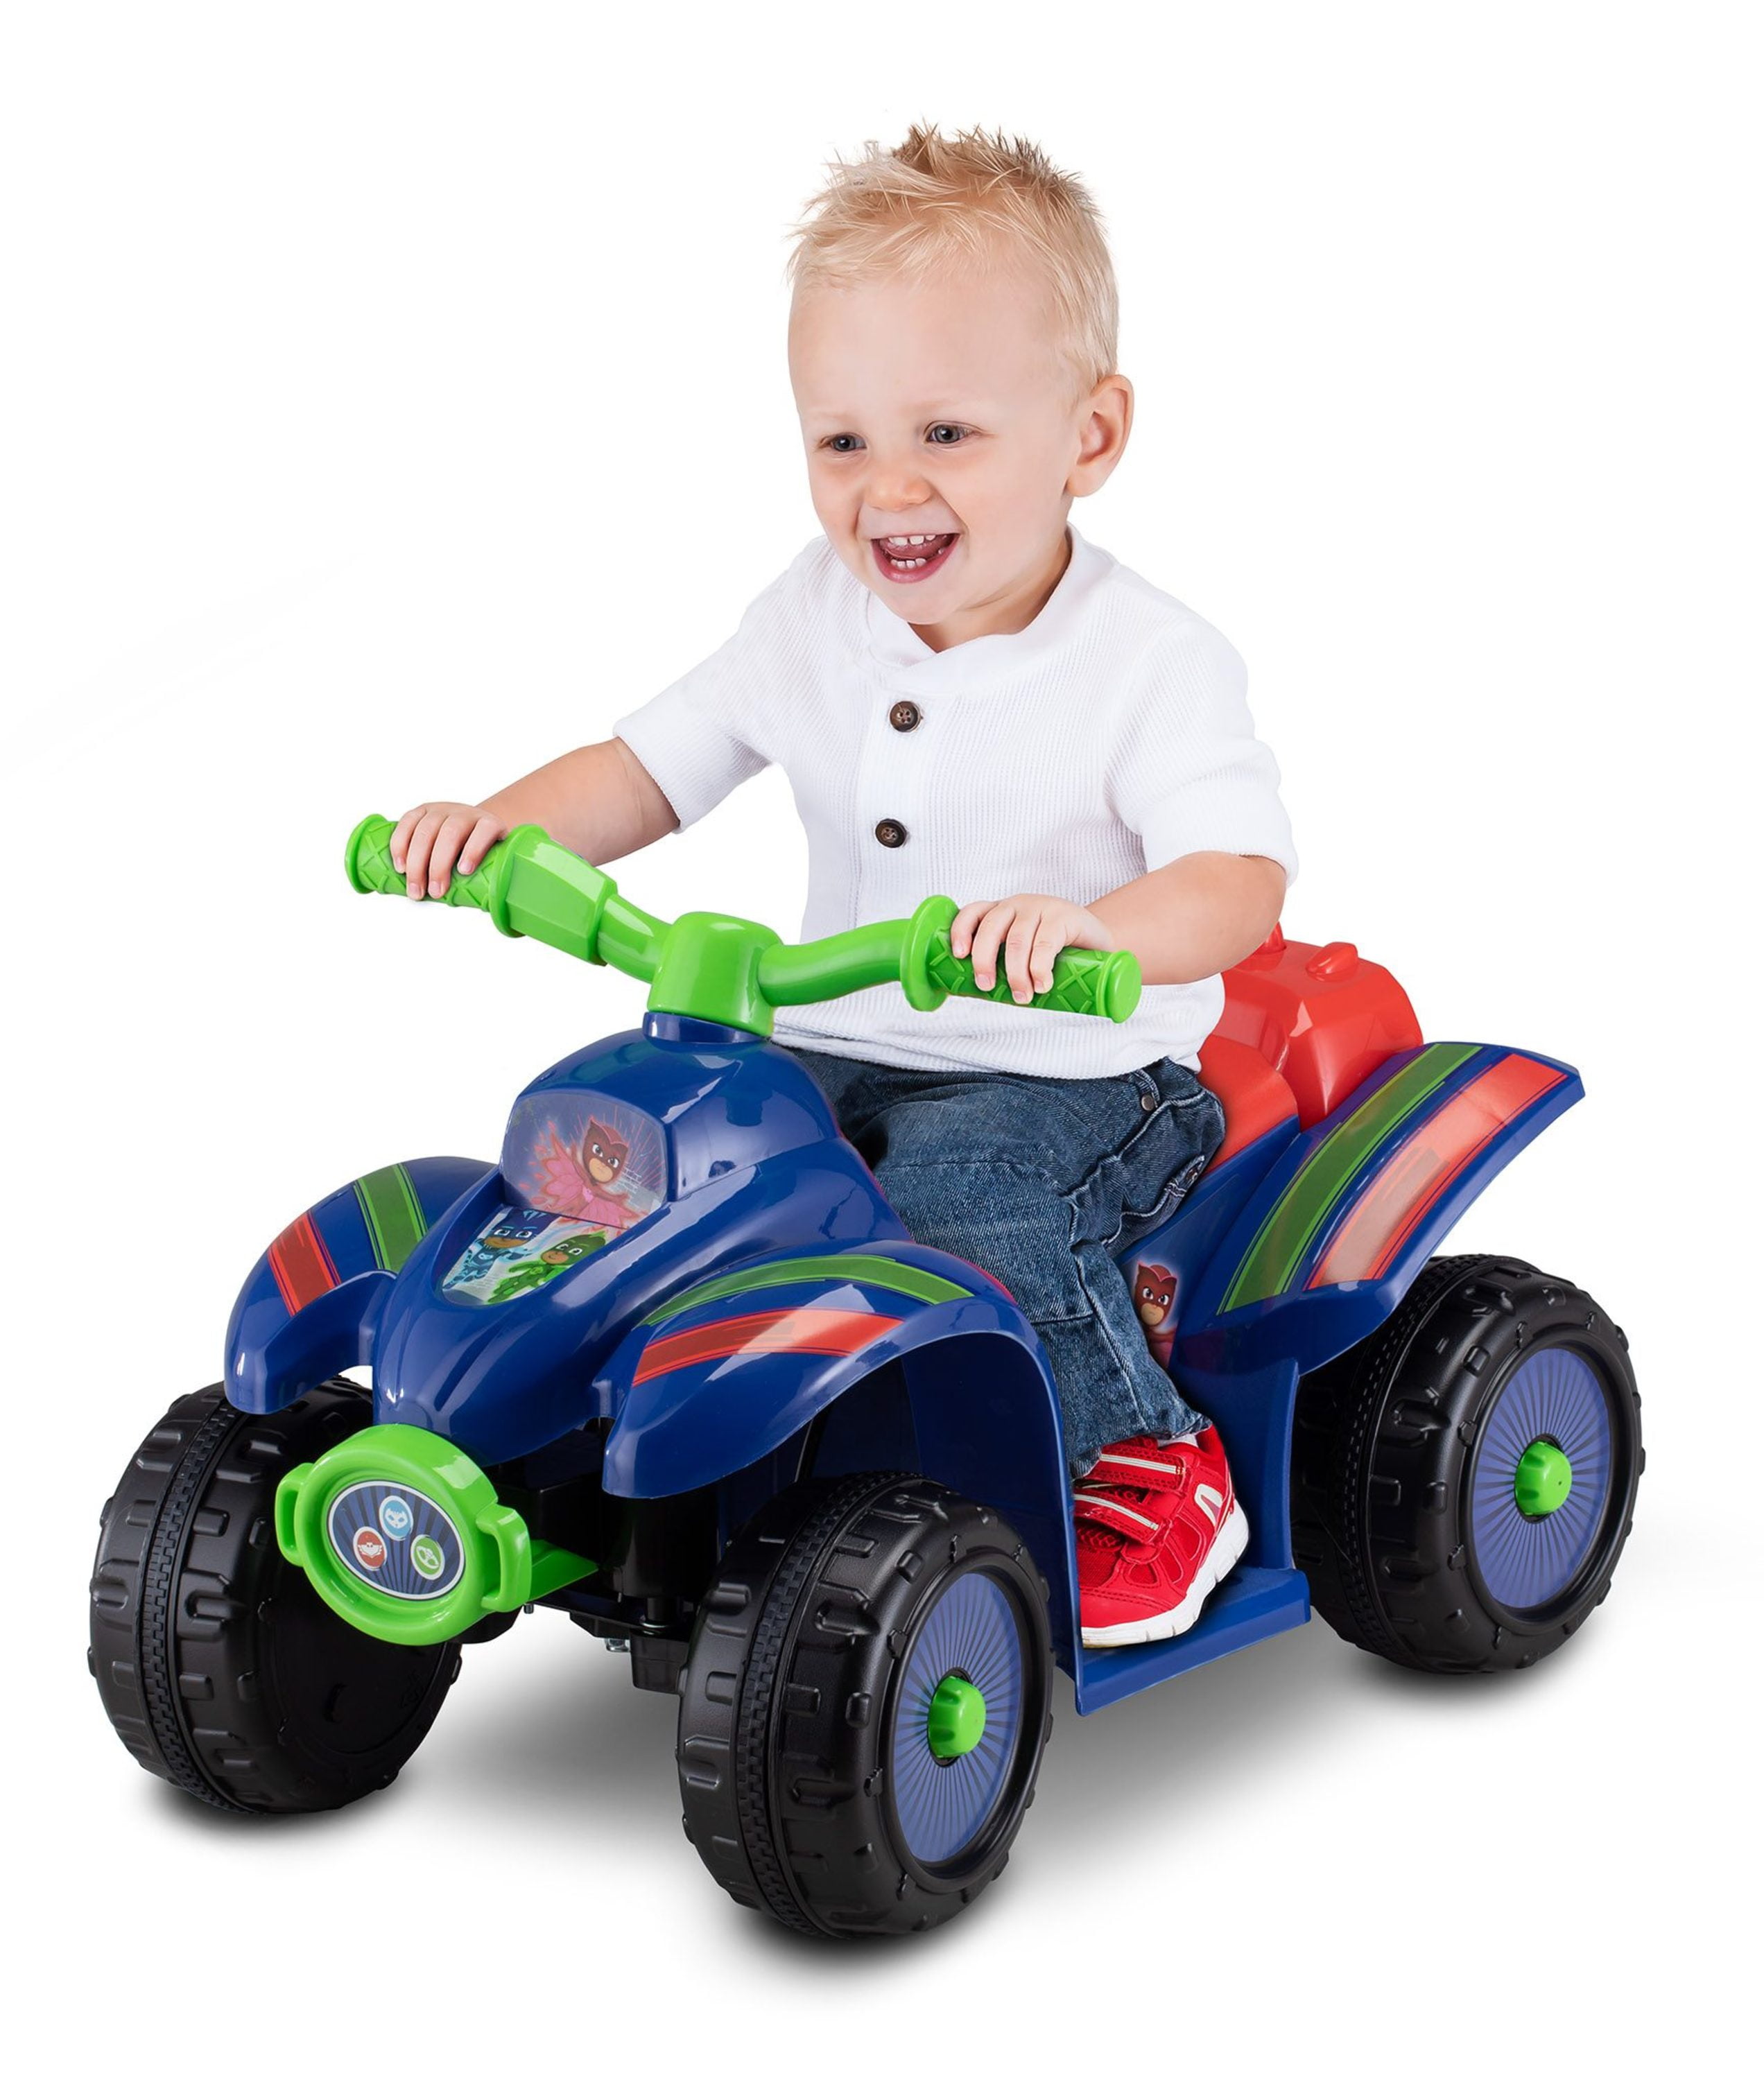 walmart riding toys for one year old